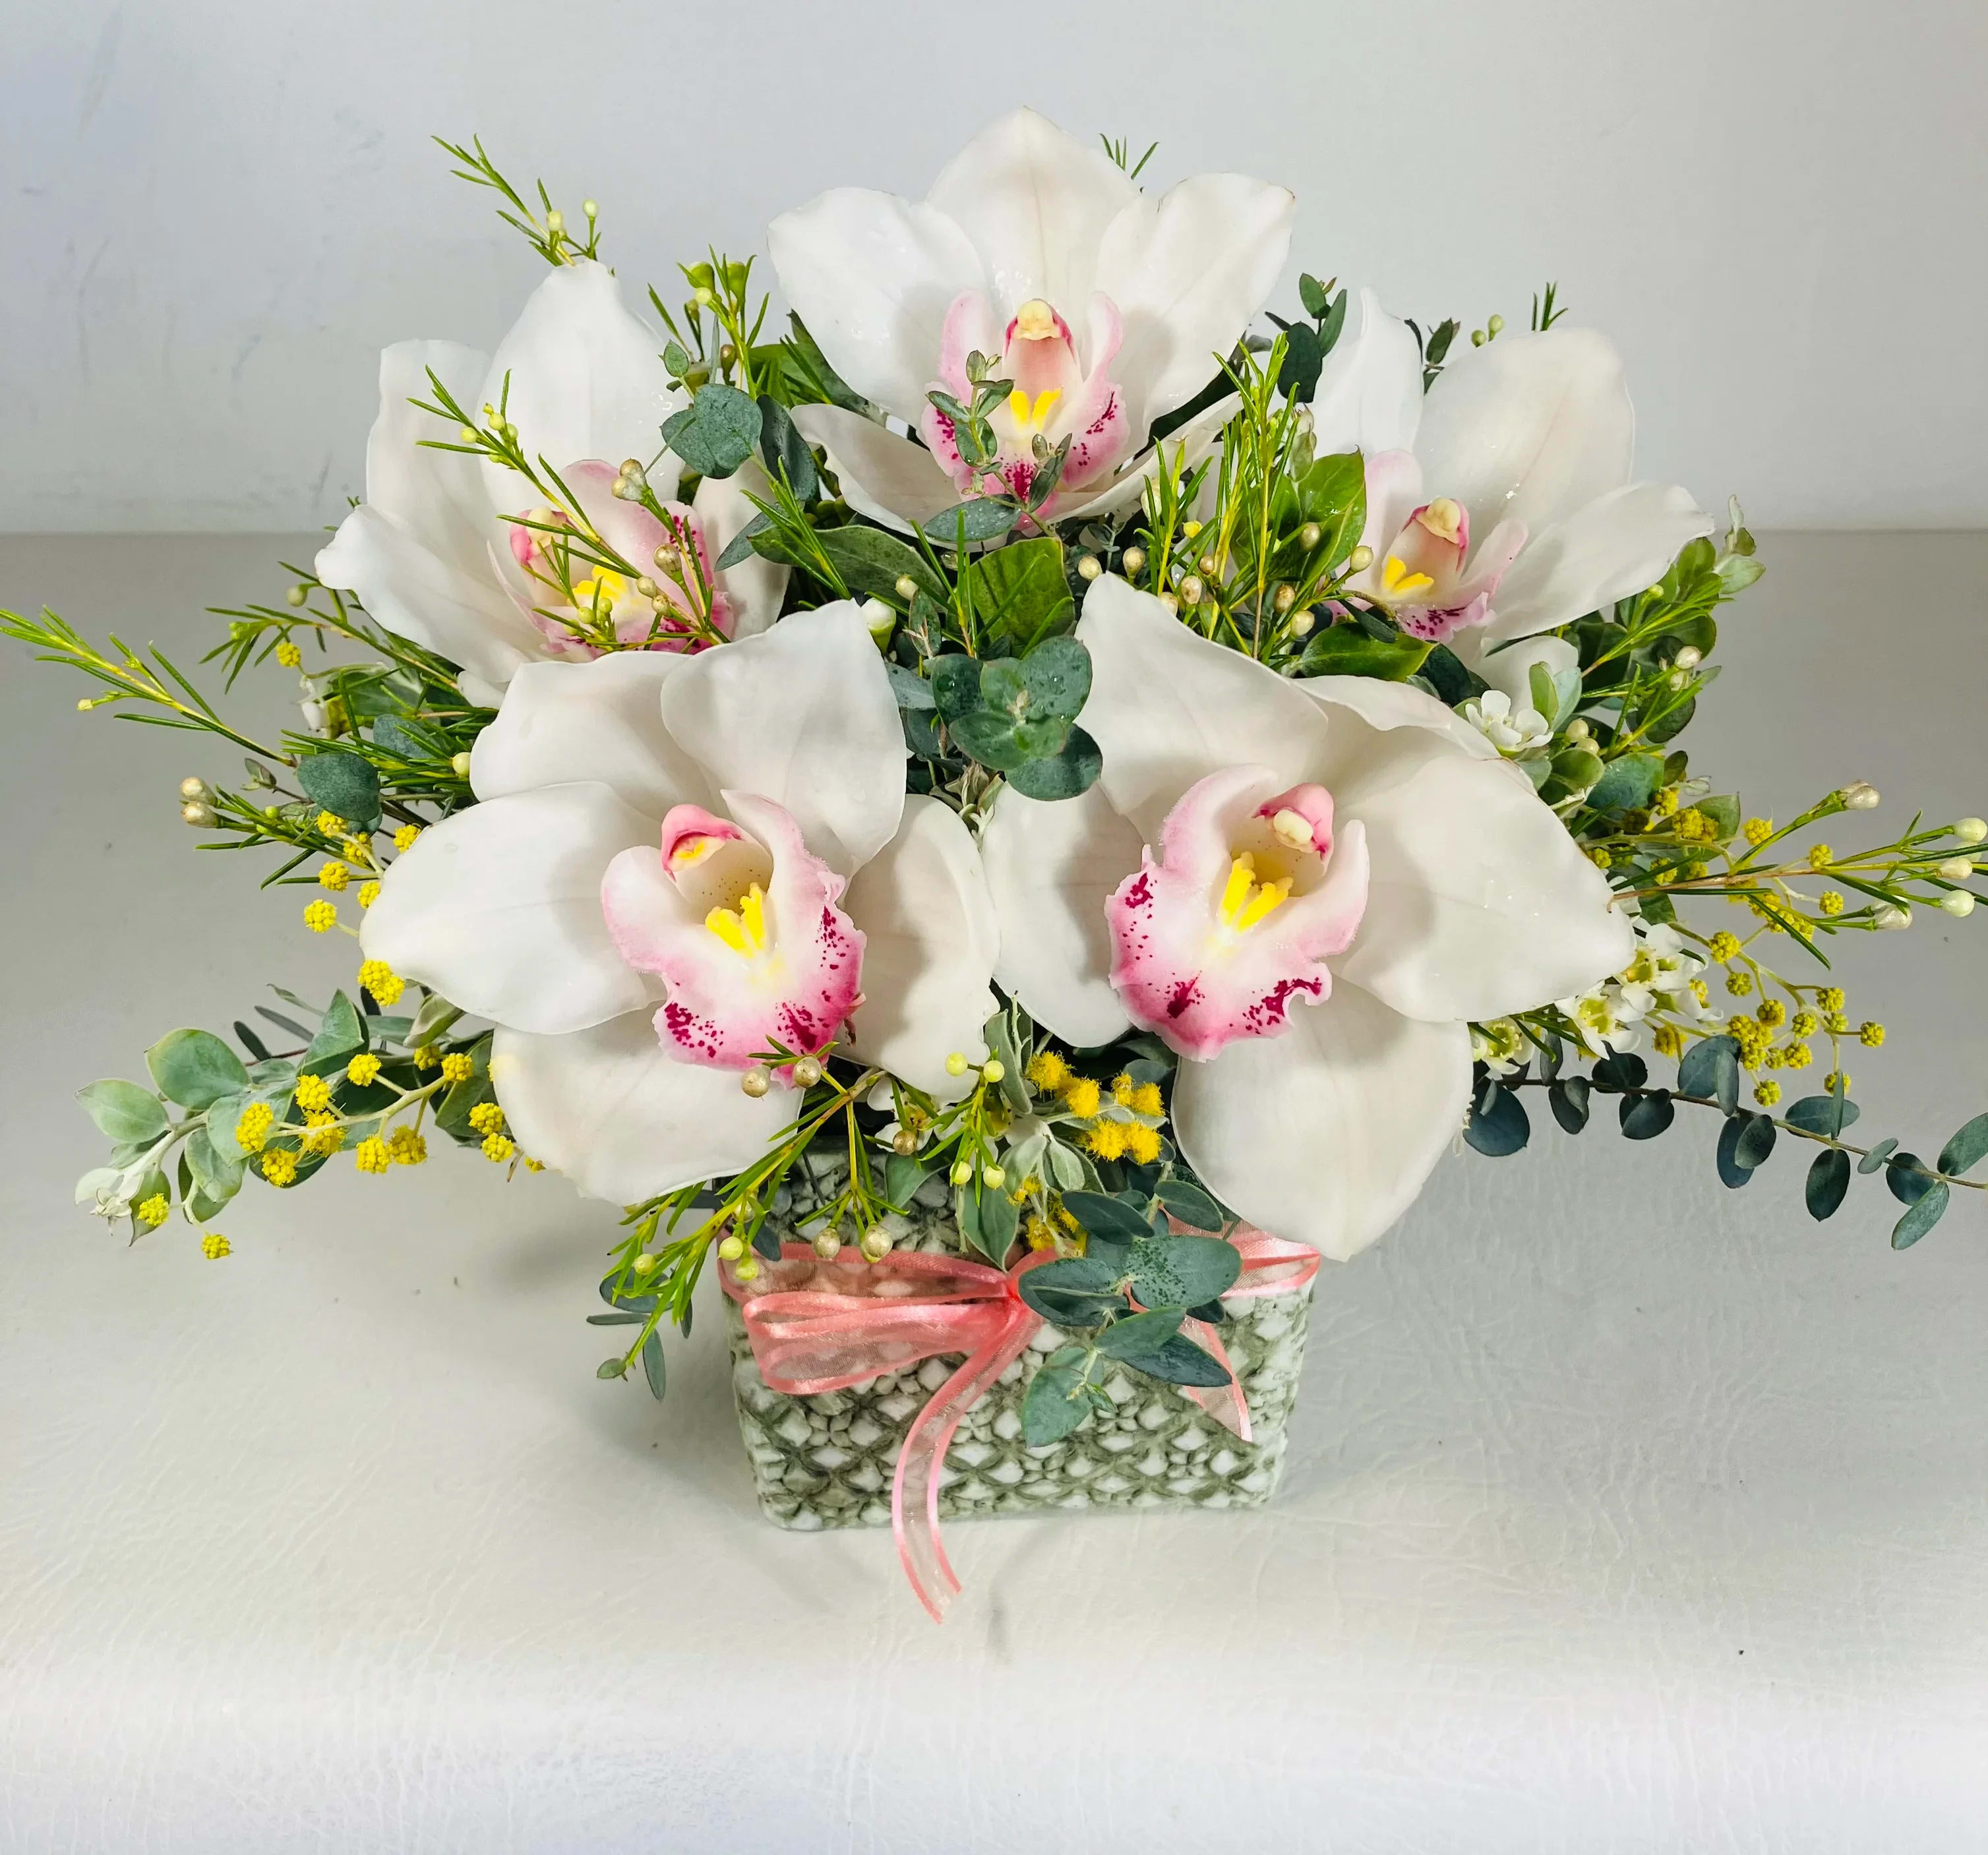 With Honor - An elegant arrangement of Cymbidium orchid to show honor and virtue for a loved one. This design is meant to show gratefulness, love, and respect for professional and familial relationships.  Can be made in a different colors of Cymbidium, Pink,Green,Yellow.